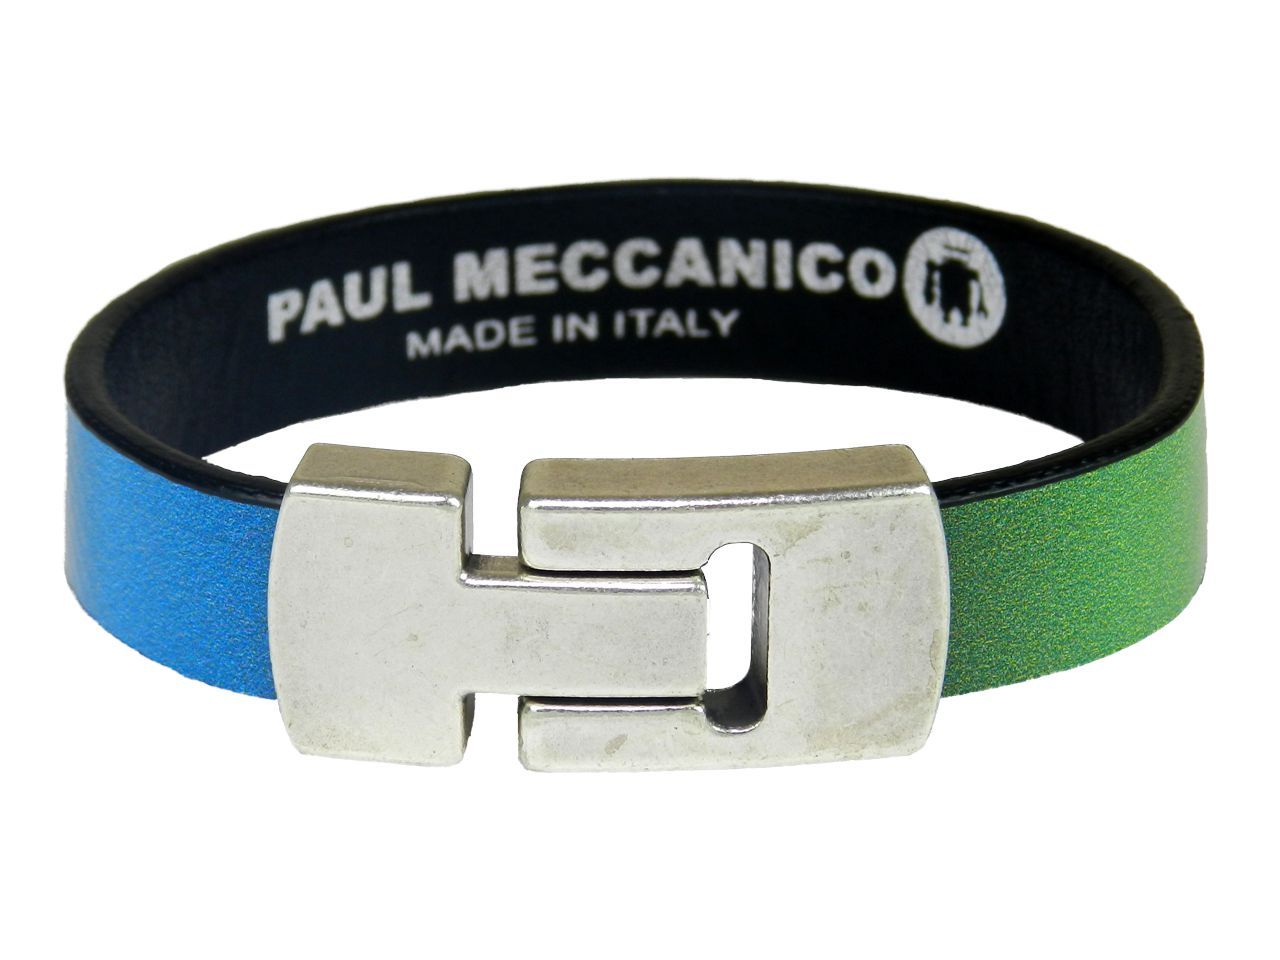 MAN'S BRACELET I AM DOPING FREE BY PAUL MECCANICO MULTICOLOR BLUE GREEN YELLOW ORANGE - Limited Edition Paul Meccanico